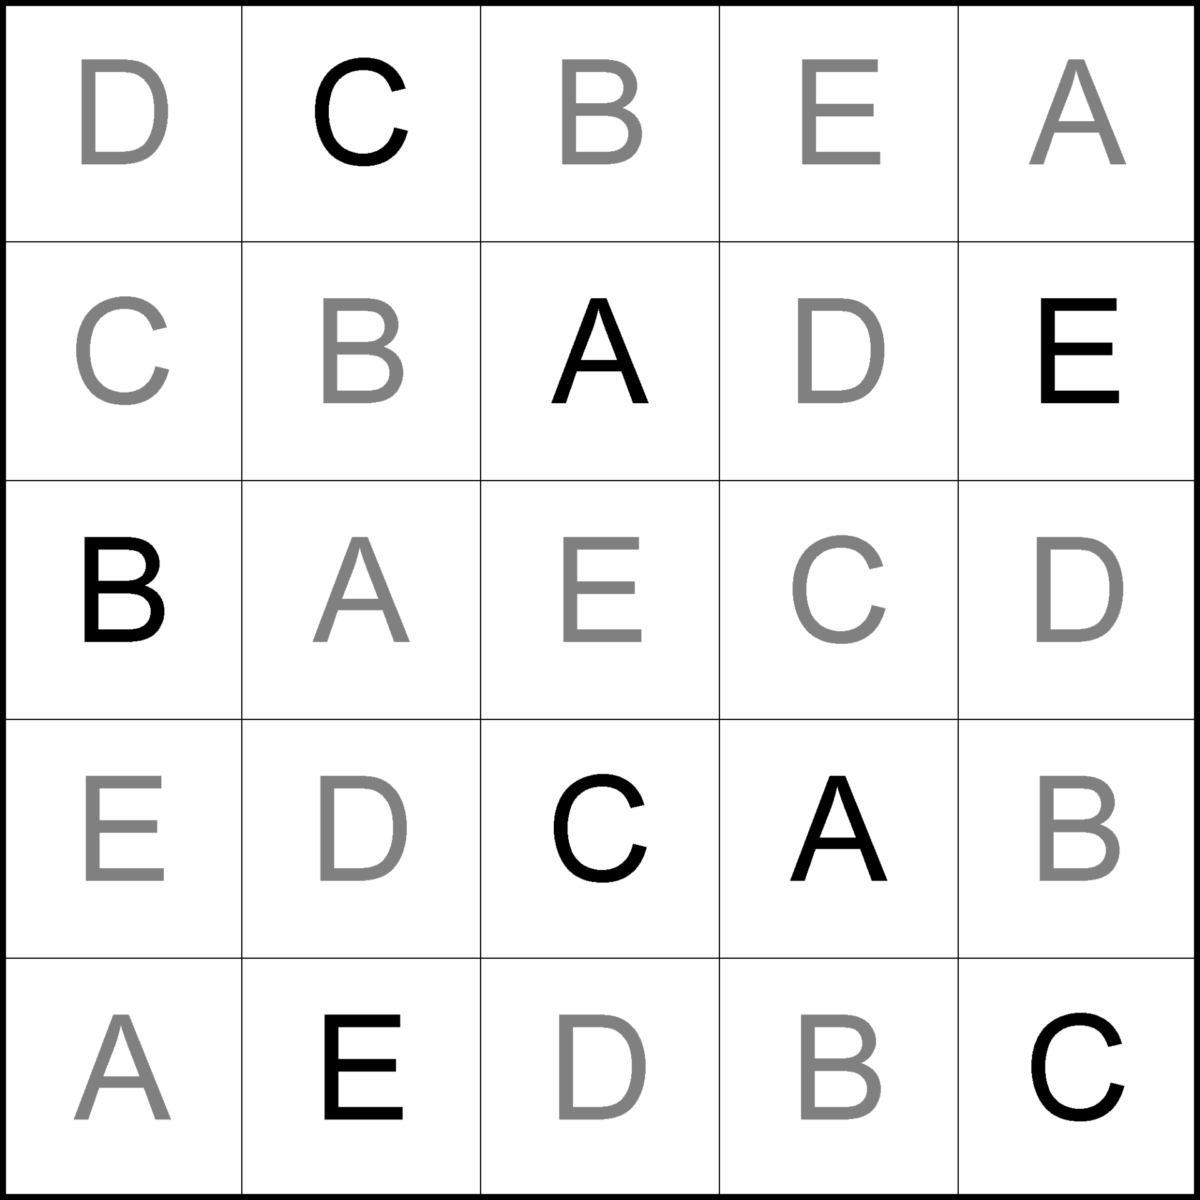 Latin Squares Creative 5x5 Letters Solution